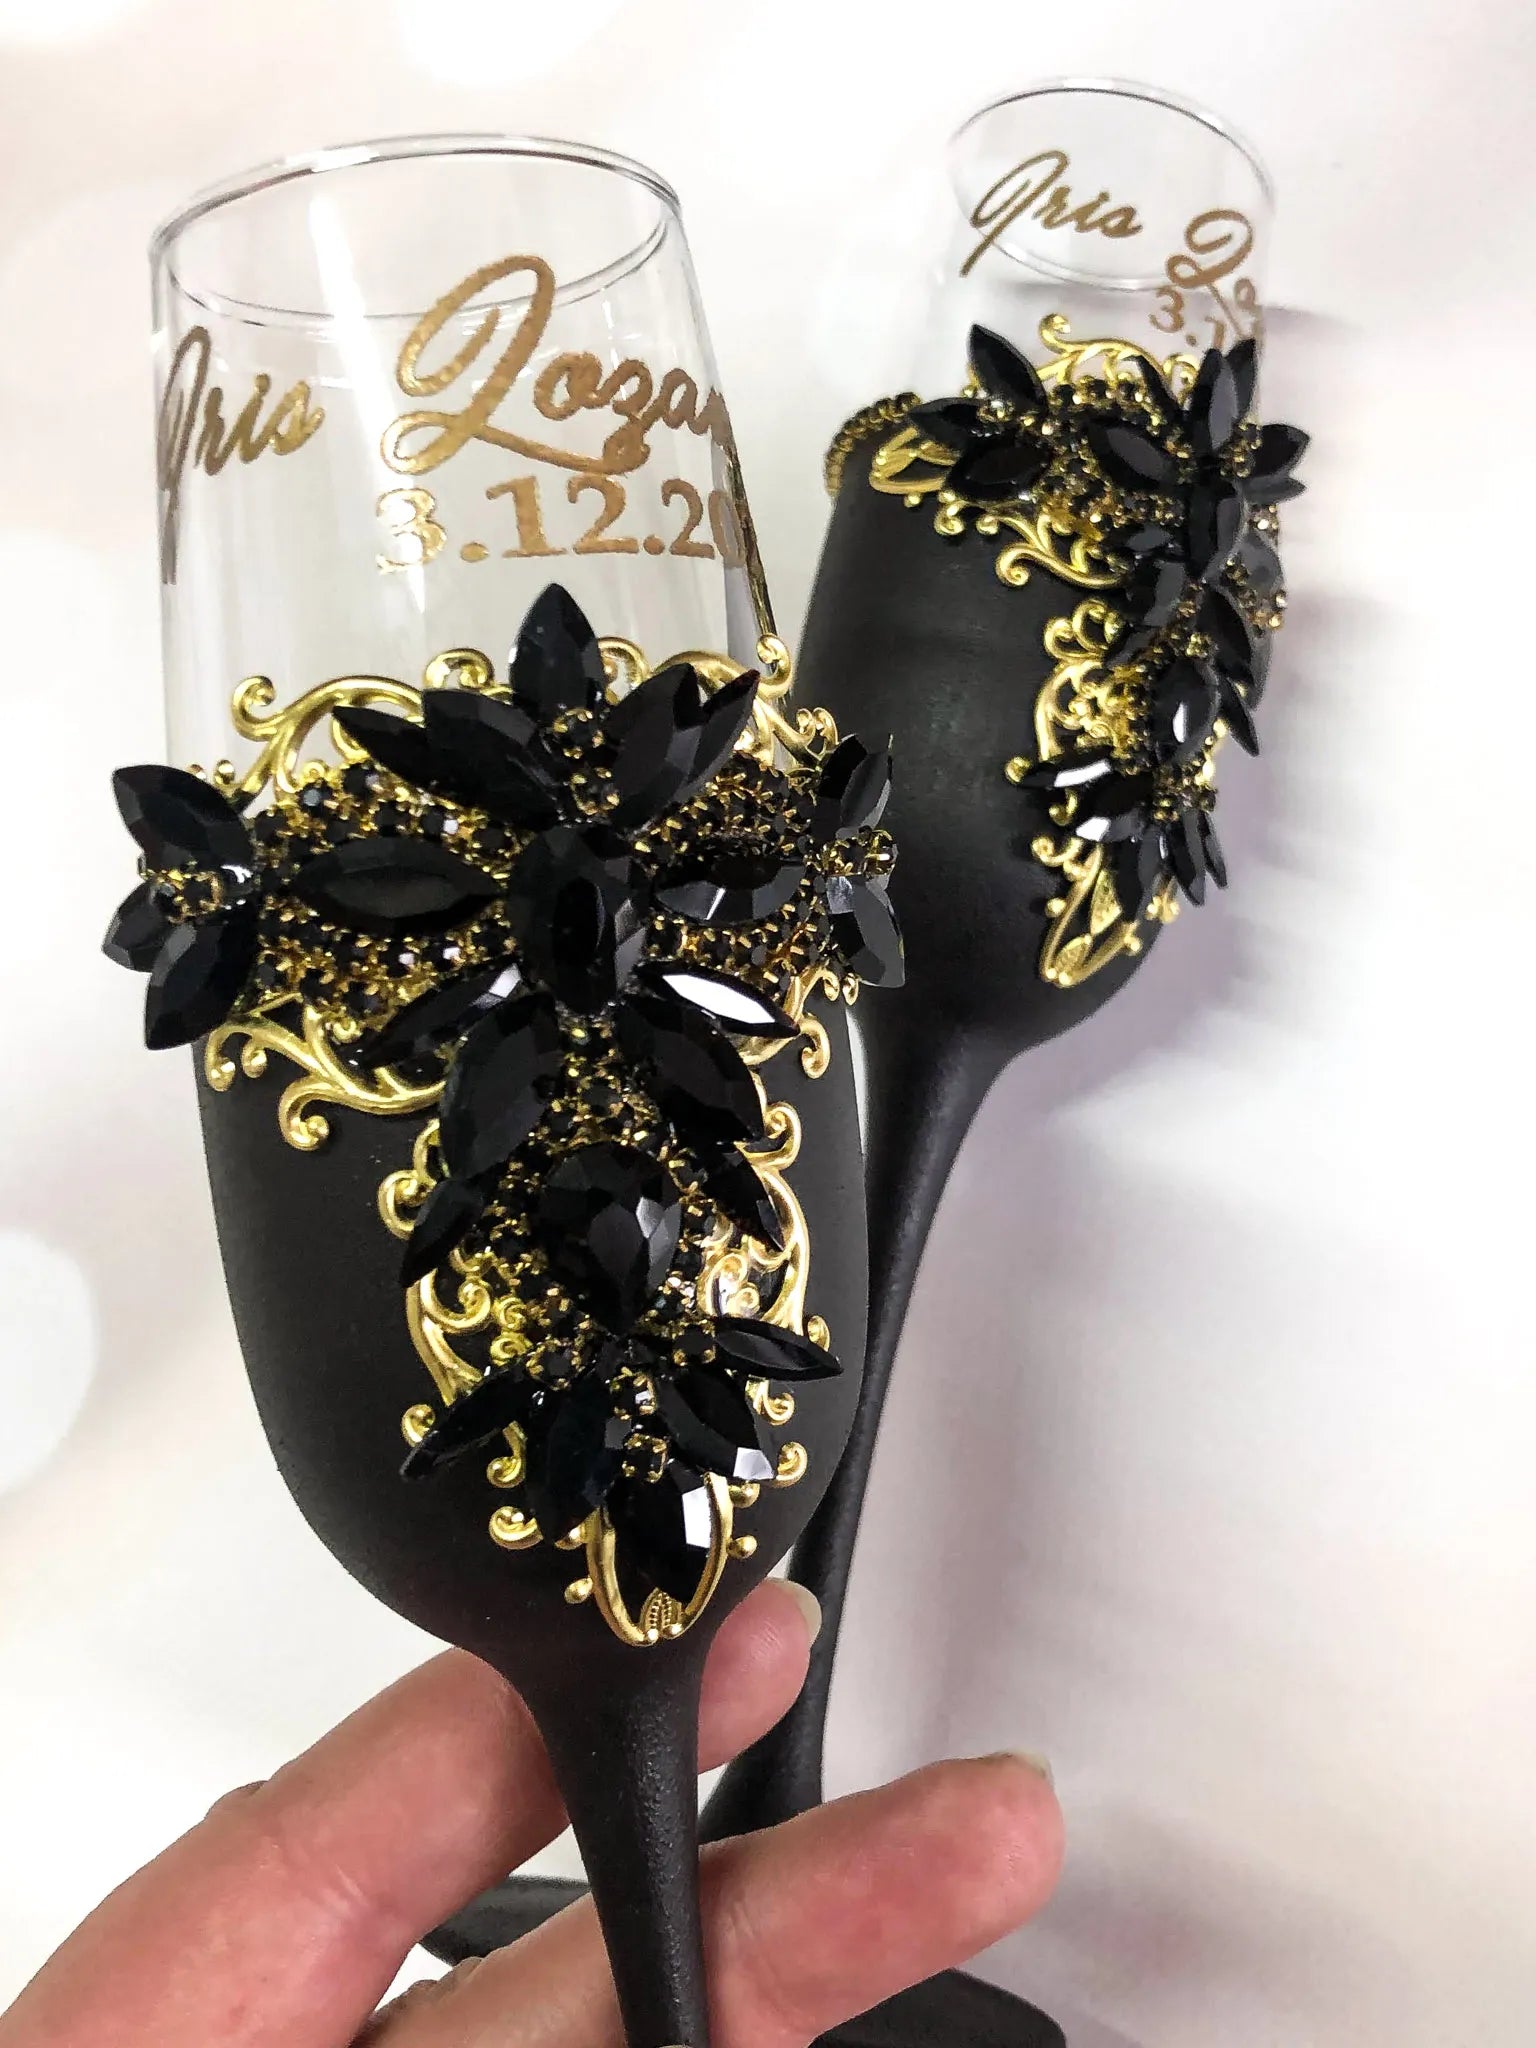 Personalized wedding champagne flutes with gothic flair